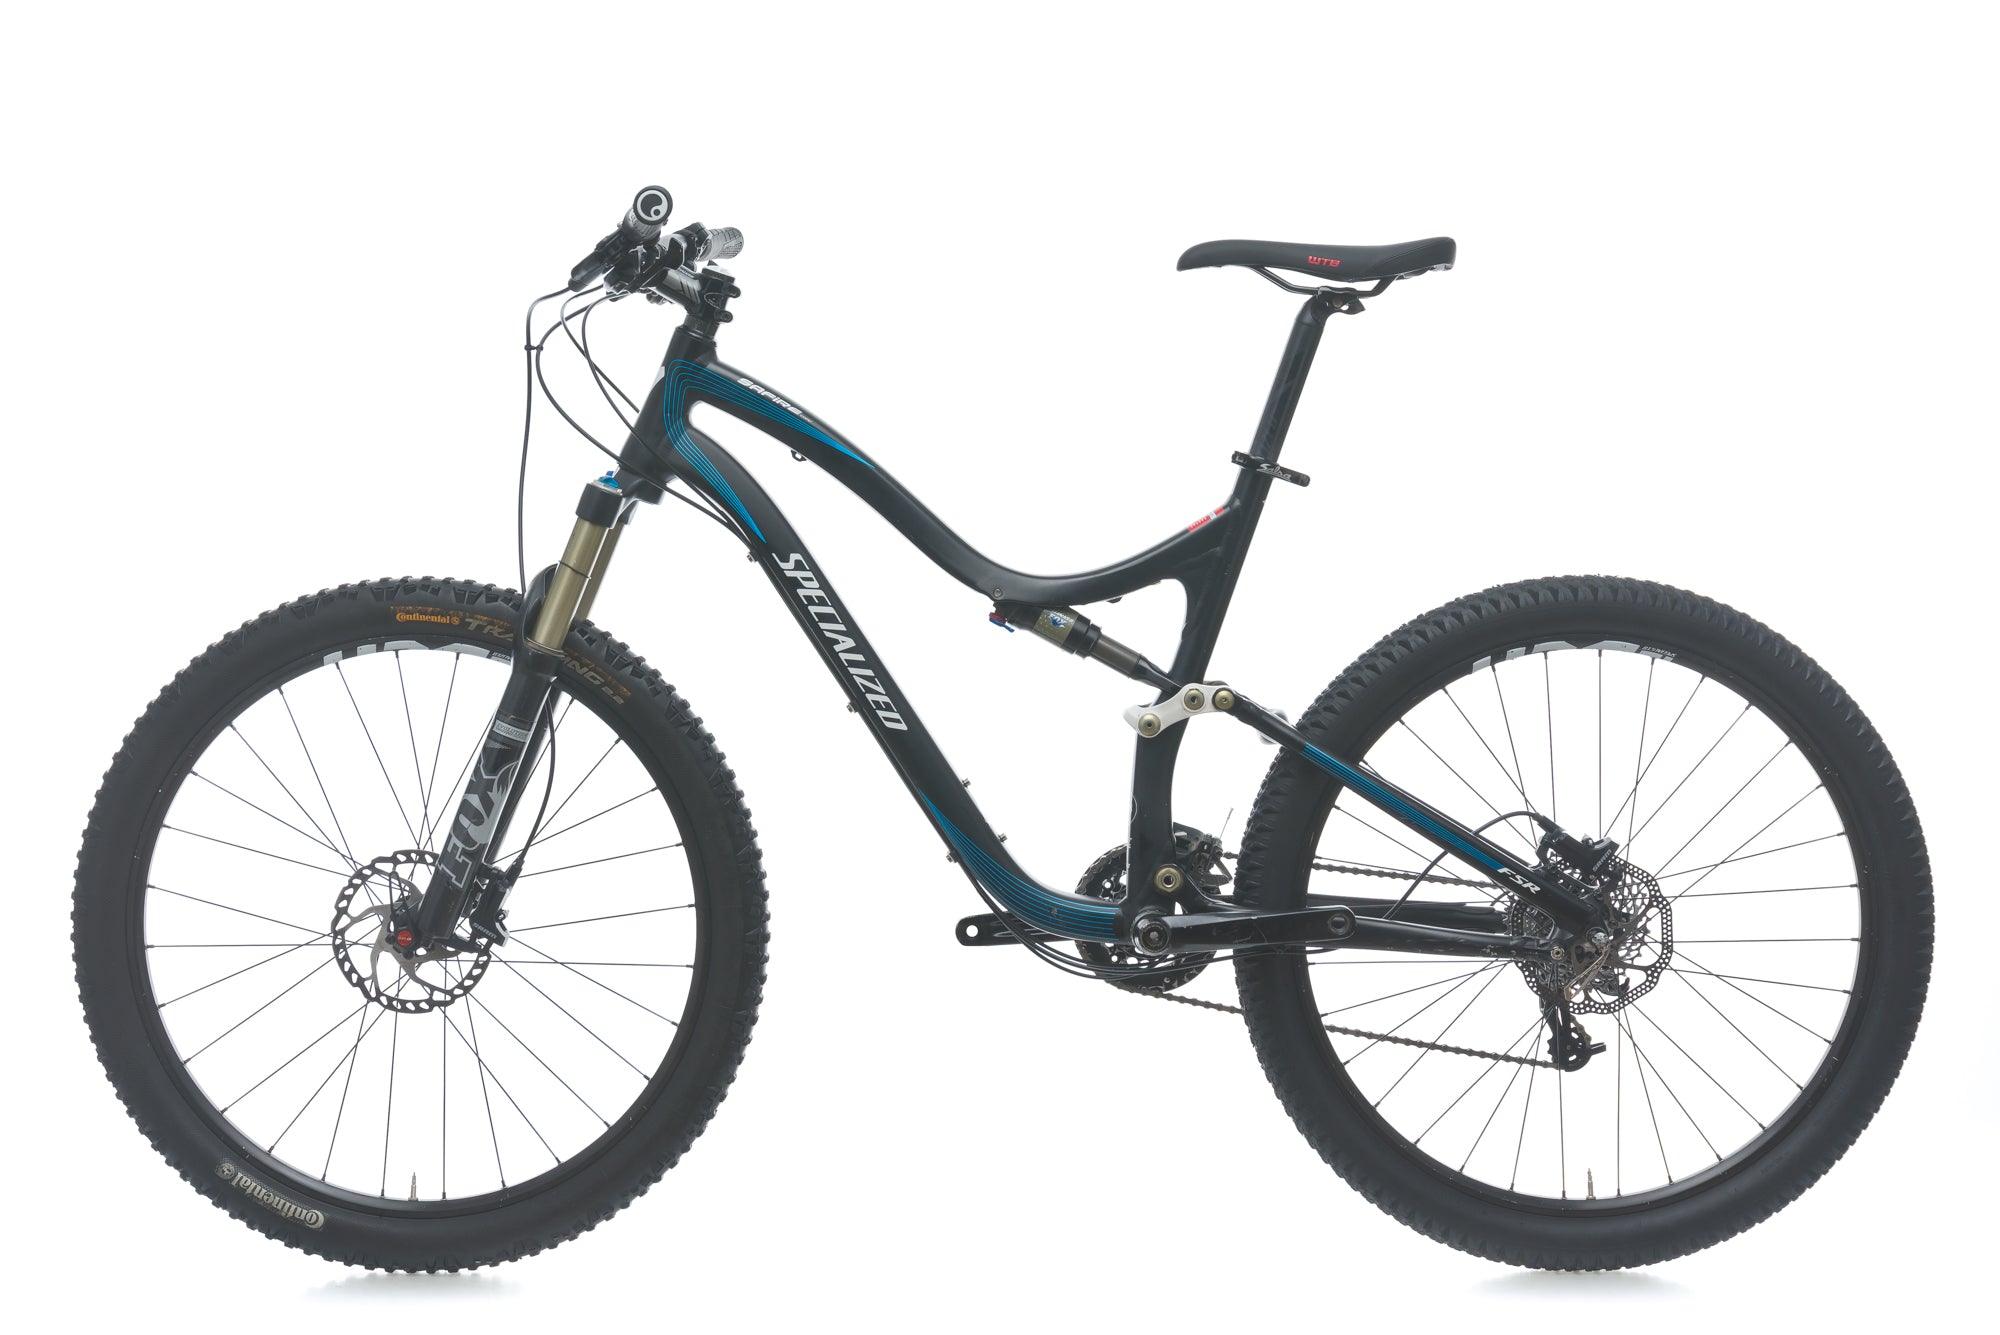 Specialized Safire Comp Large Womens Bike - 2012